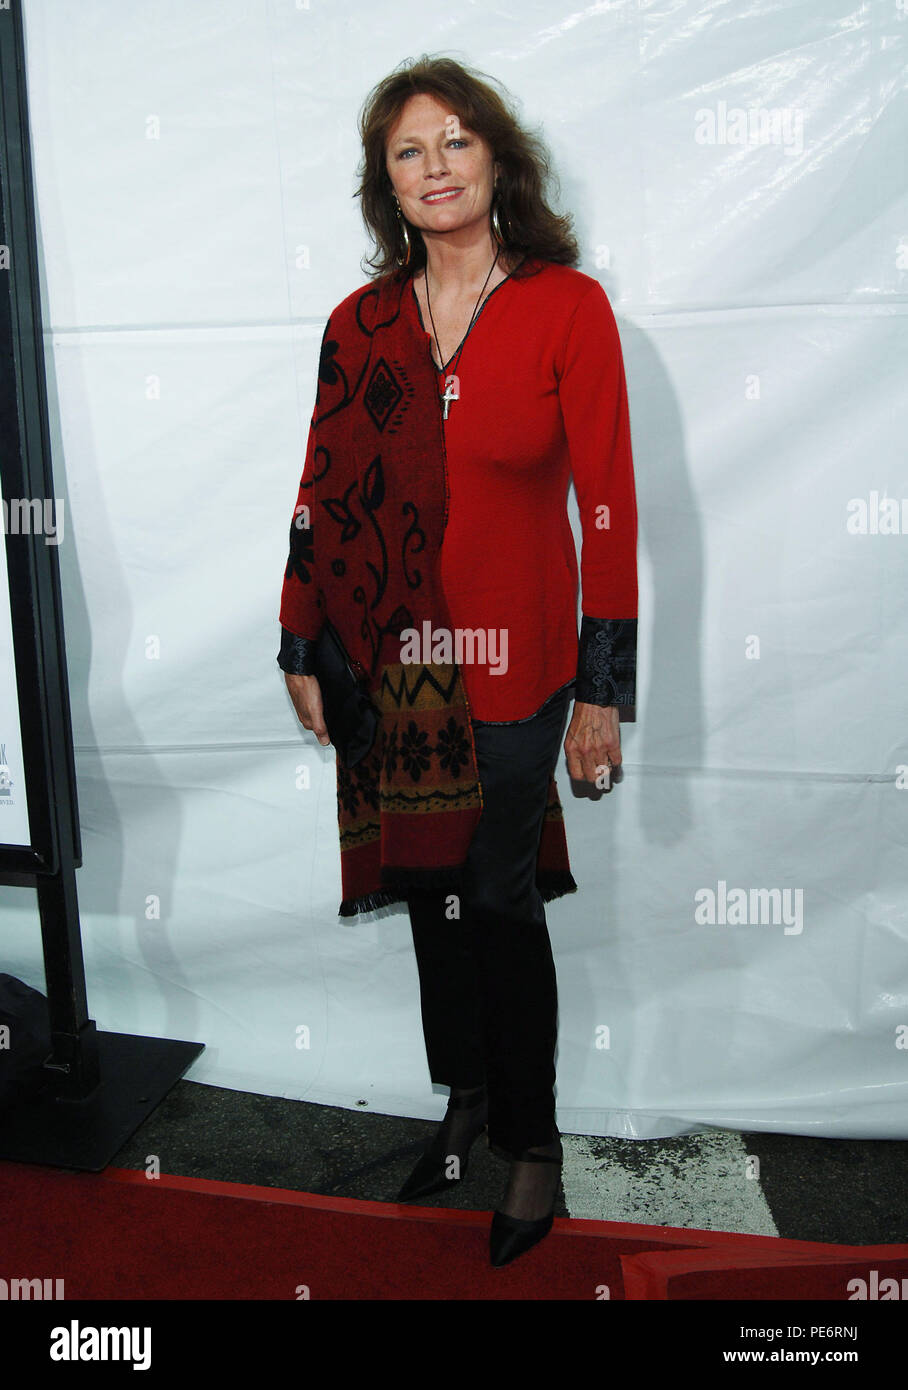 Jacqueline Bisset arriving at the Monster in Law Premiere at the National Theatre in Los Angeles. April 29, 2005.22 BissetJacqueline056 Red Carpet Event, Vertical, USA, Film Industry, Celebrities,  Photography, Bestof, Arts Culture and Entertainment, Topix Celebrities fashion /  Vertical, Best of, Event in Hollywood Life - California,  Red Carpet and backstage, USA, Film Industry, Celebrities,  movie celebrities, TV celebrities, Music celebrities, Photography, Bestof, Arts Culture and Entertainment,  Topix, vertical, one person,, from the year , 2005, inquiry tsuni@Gamma-USA.com Fashion - Full Stock Photo